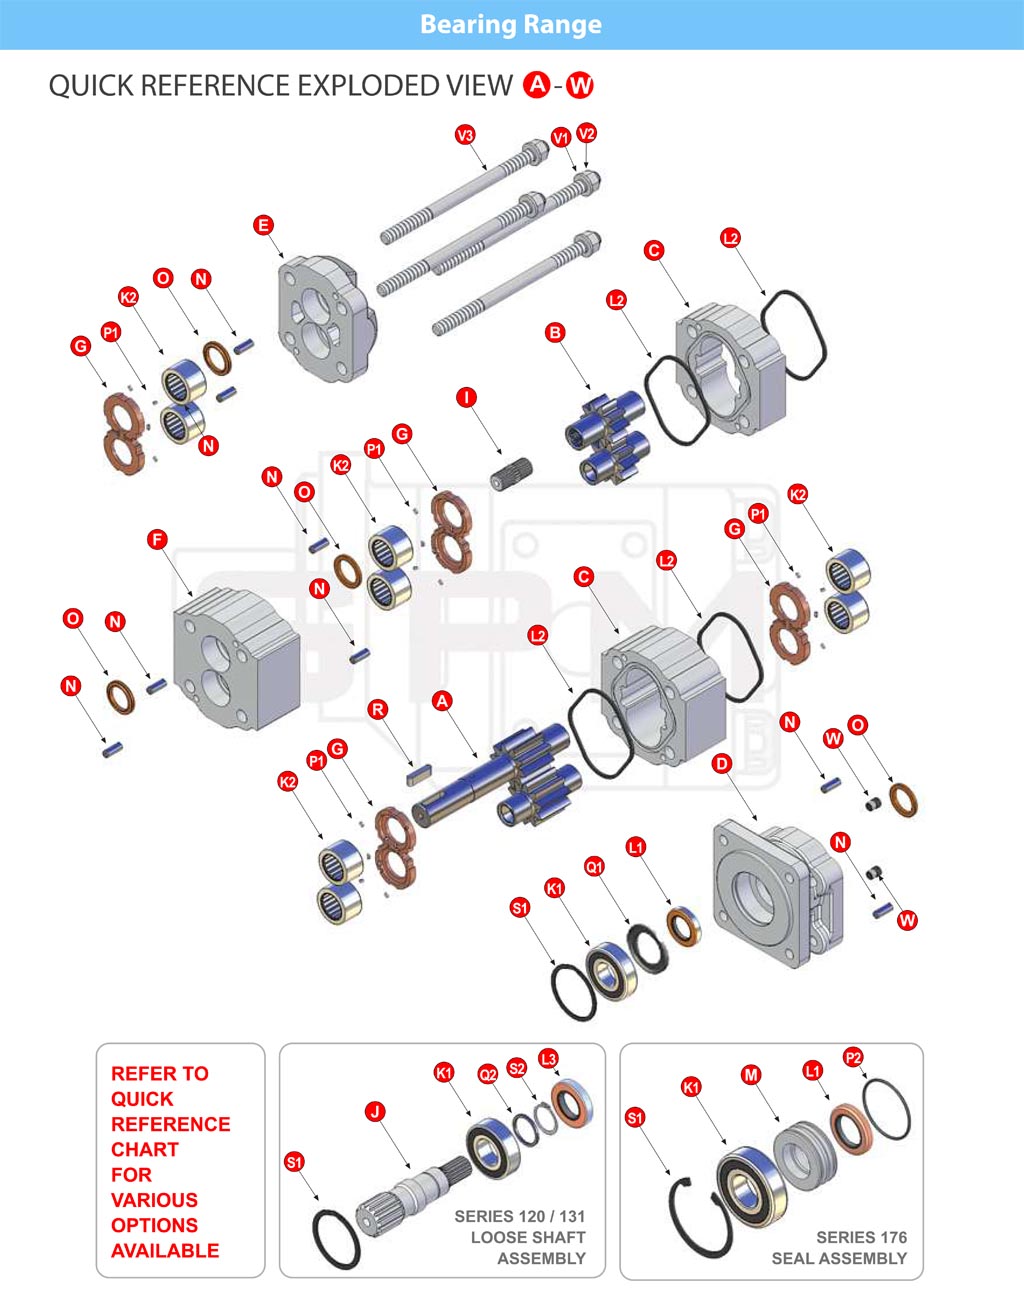 GPM Bearing Pumps Exploded View